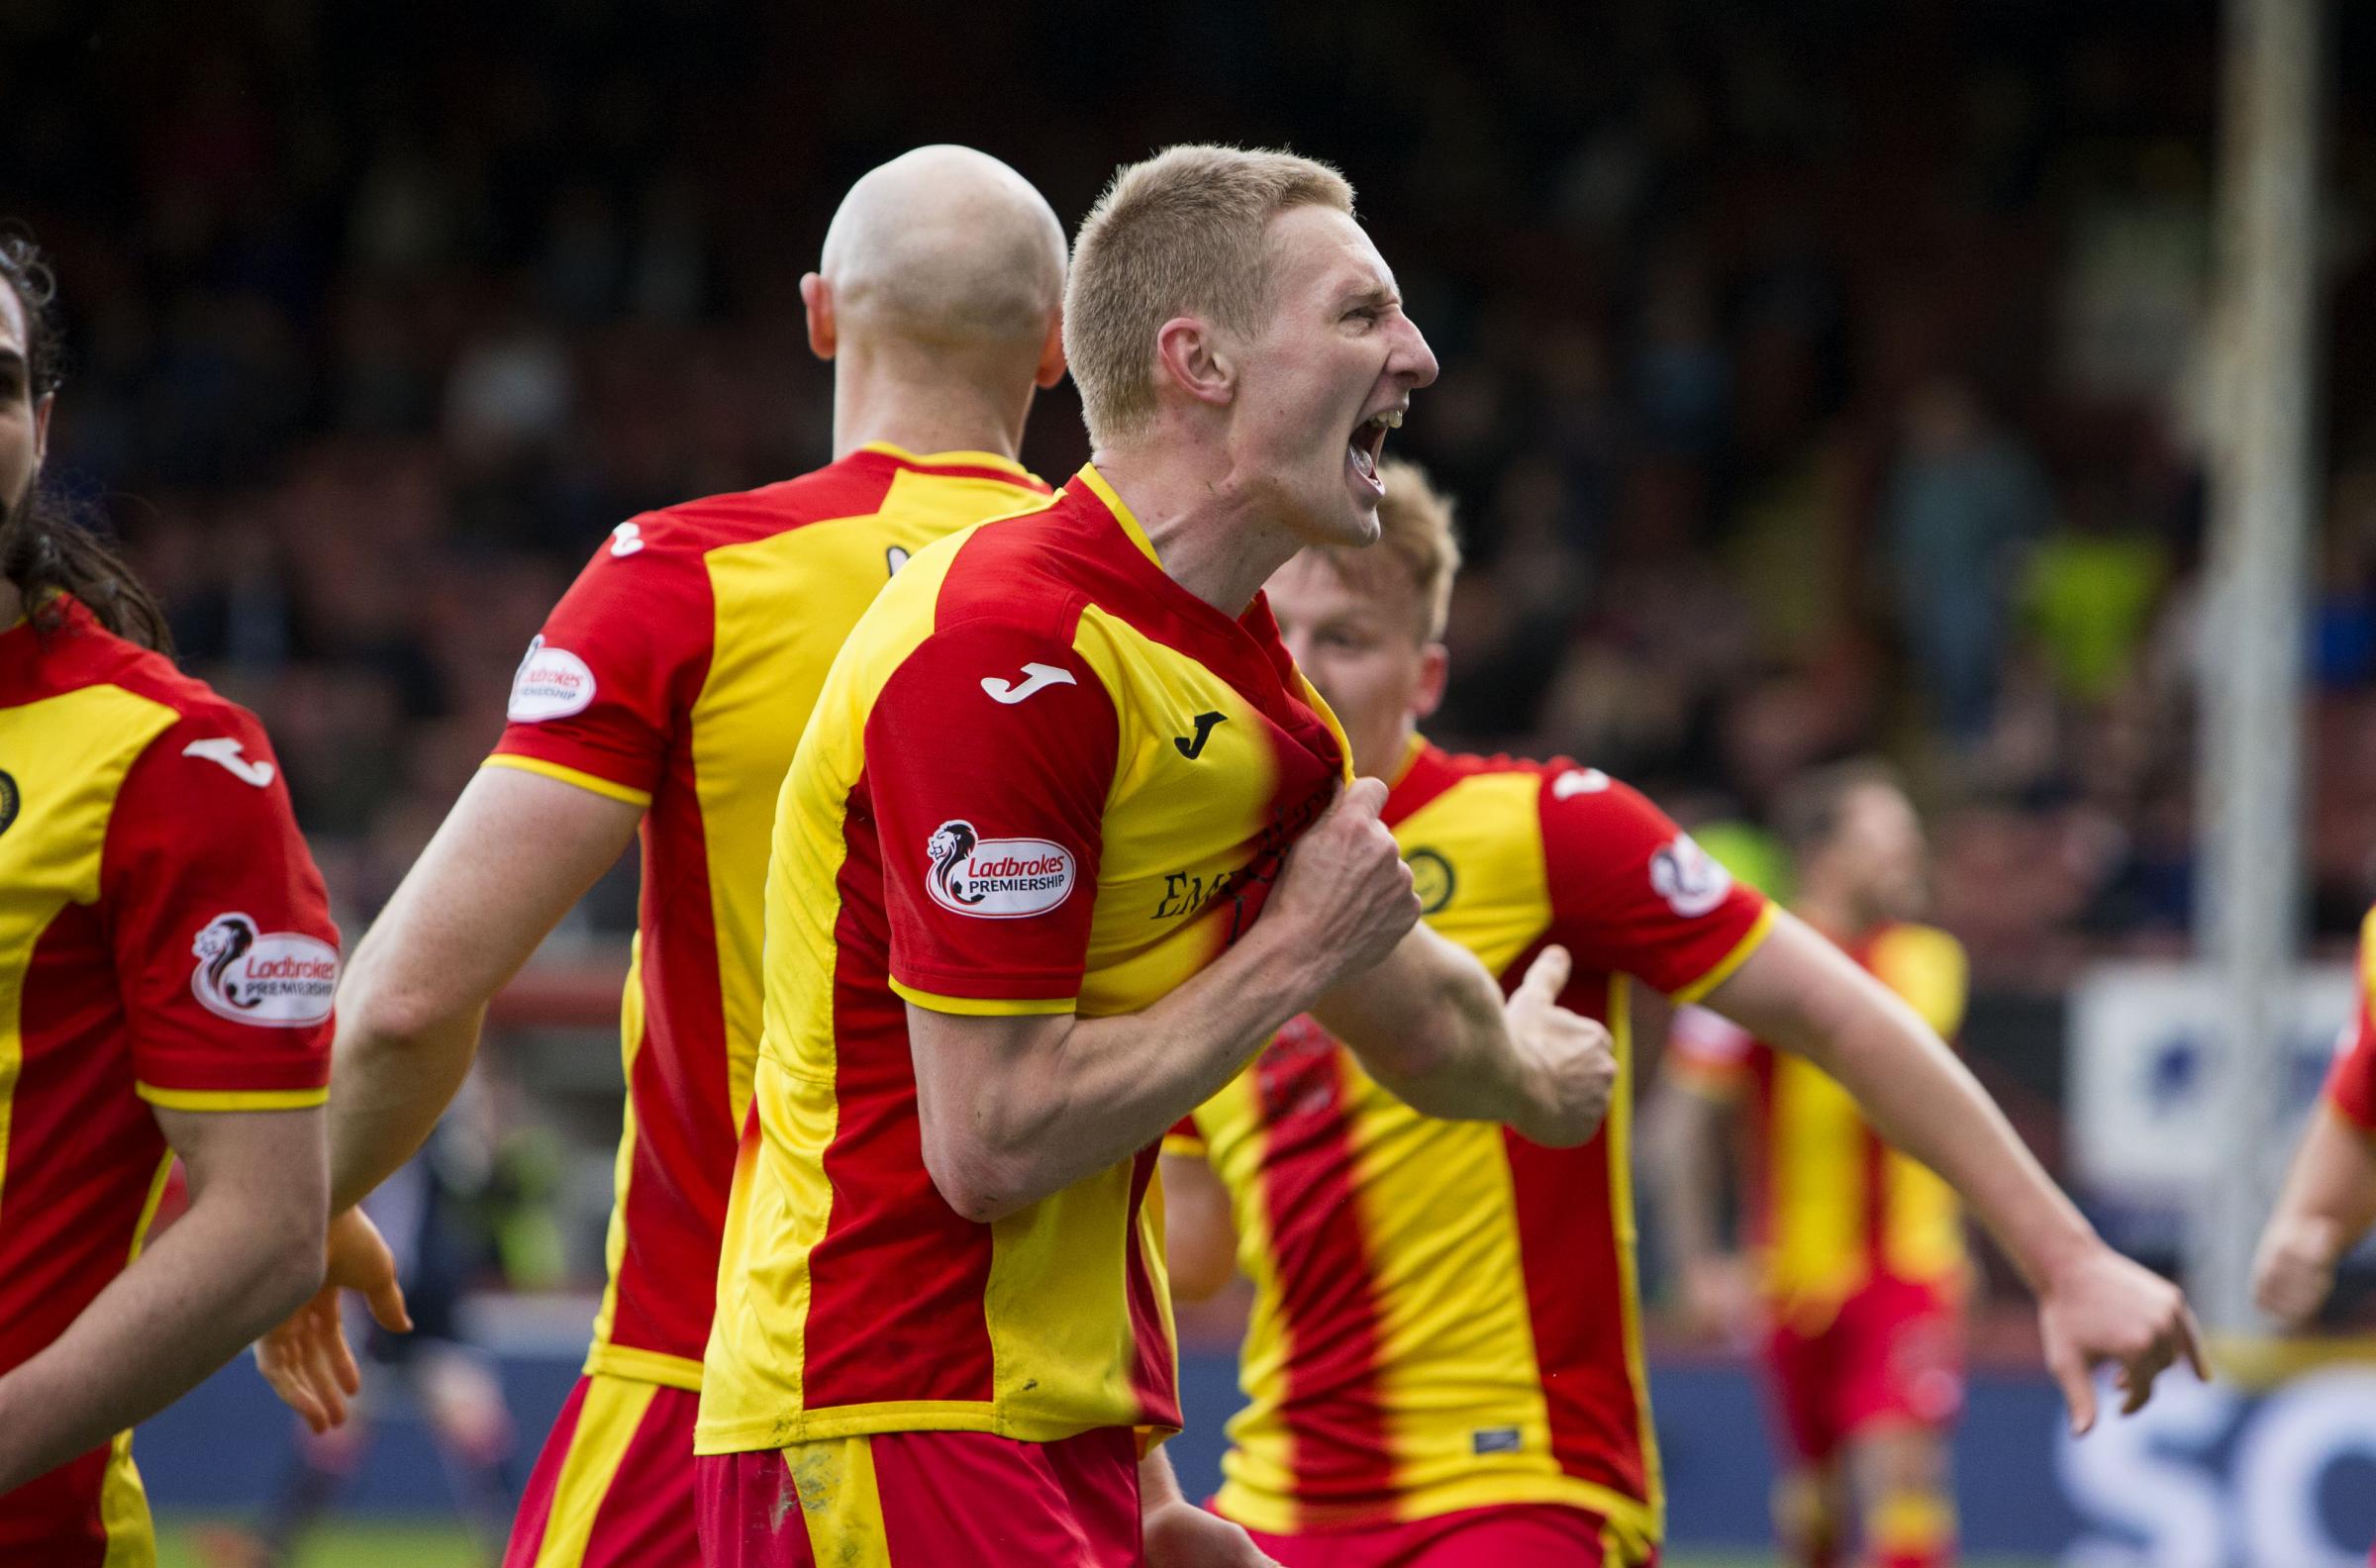 Partick Thistle sign Andy Geggan on loan as Chris Erskine closes in on fourth Jags spell